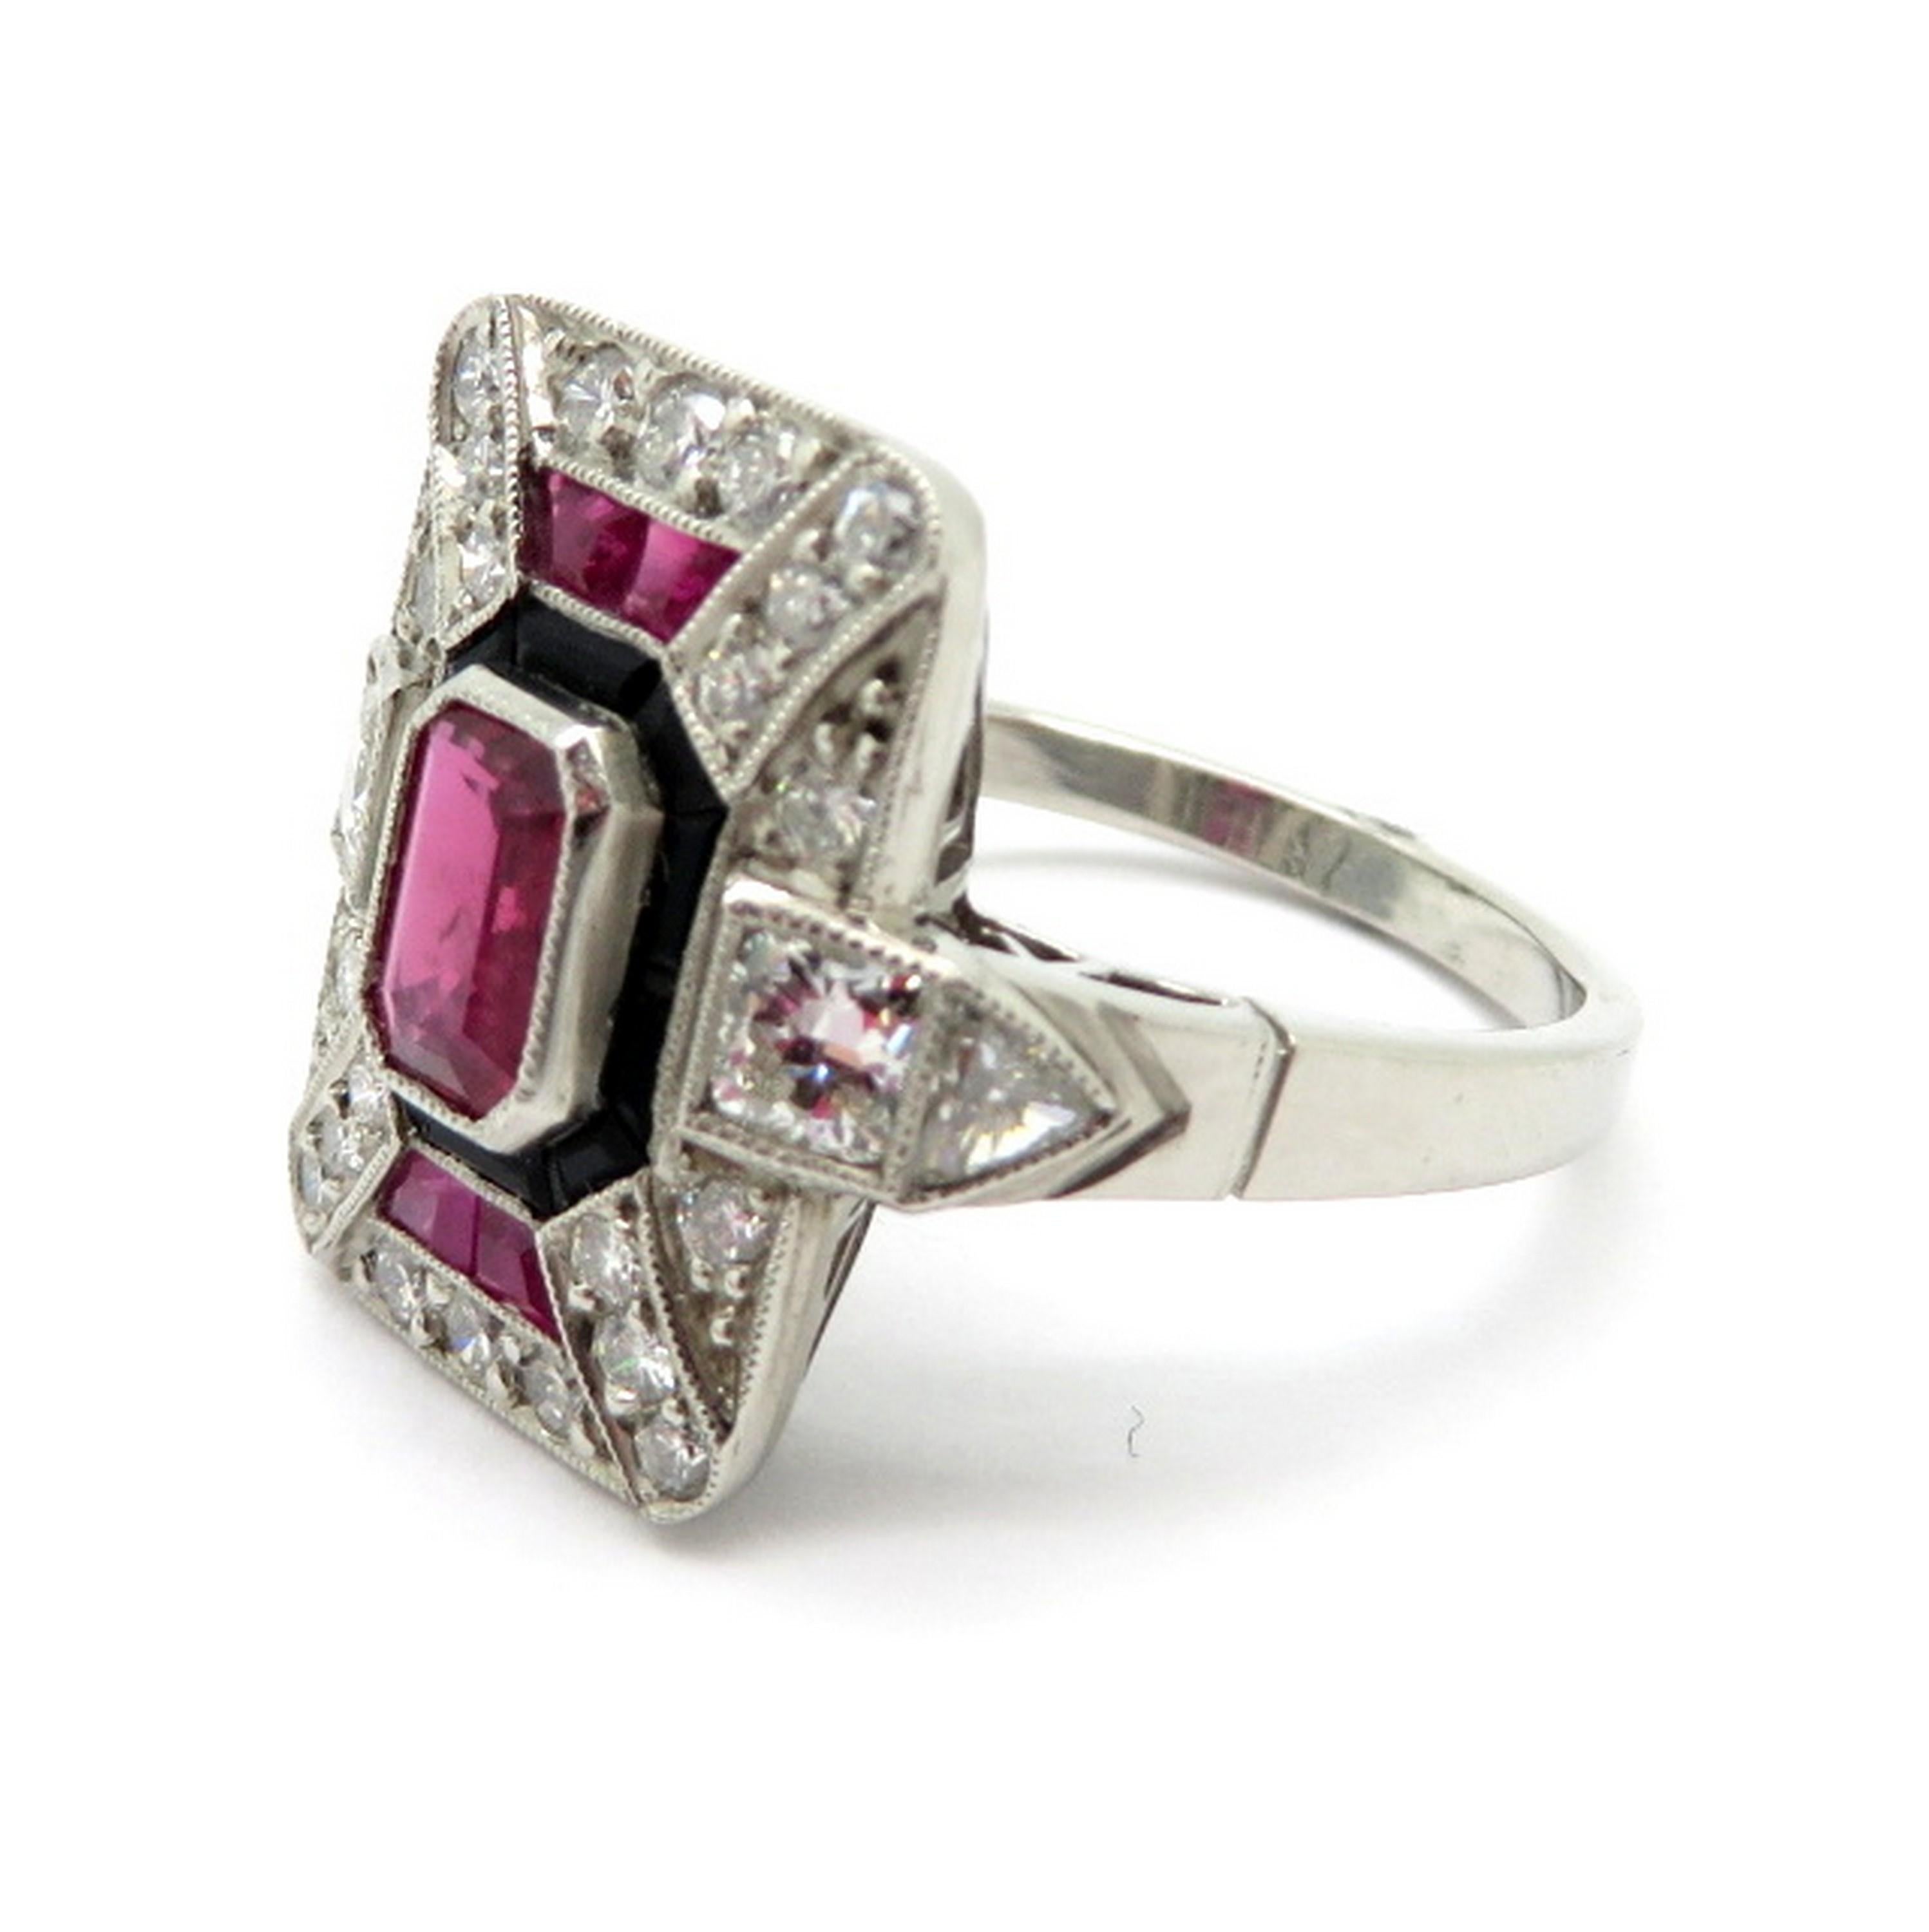 Estate antique platinum diamond ruby and onyx Art Deco style ring. Centering one emerald cut milgrain bezel set fine quality ruby weighing approximately 0.60 carats. Accented with four calibre cut fine quality rubies weighing approximately 0.75